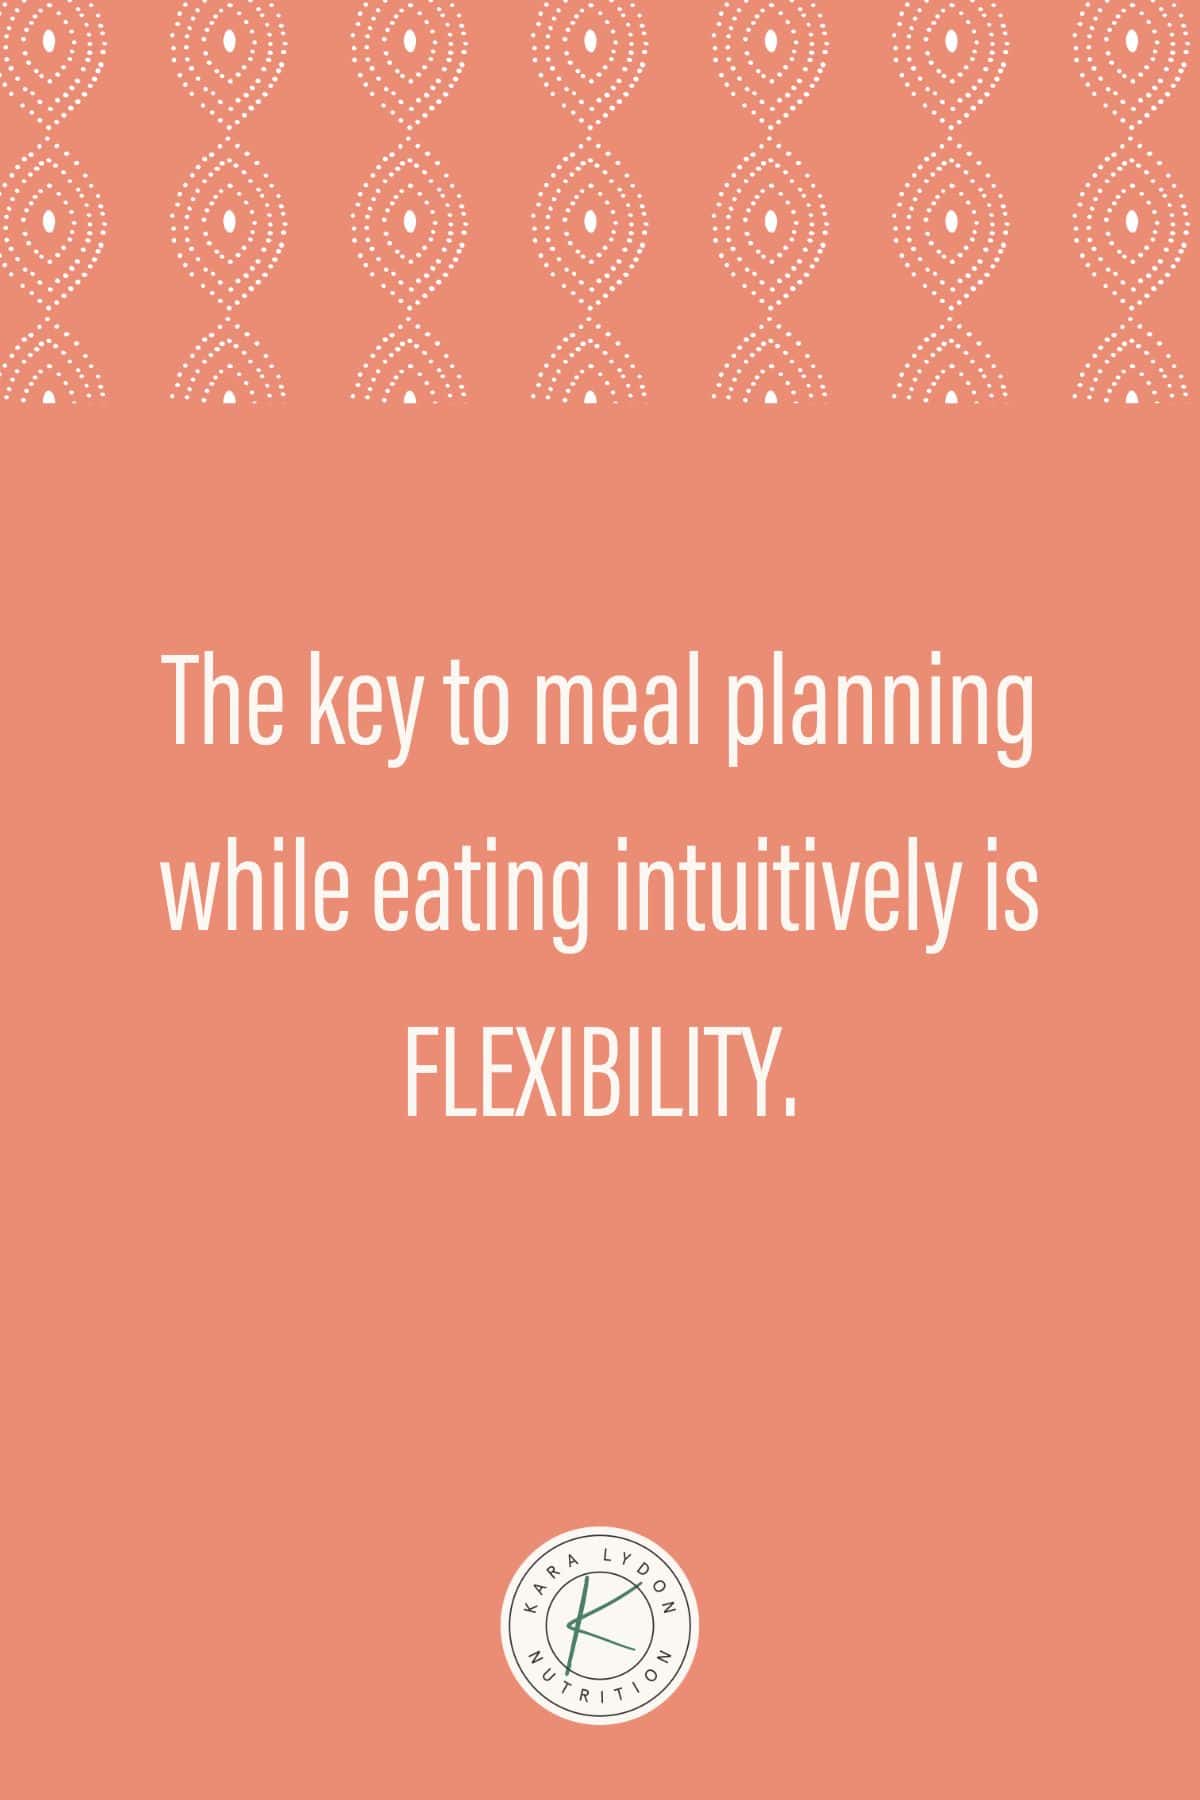 Graphic with quote: "The key to meal planning while eating intuitively is FLEXIBILITY."